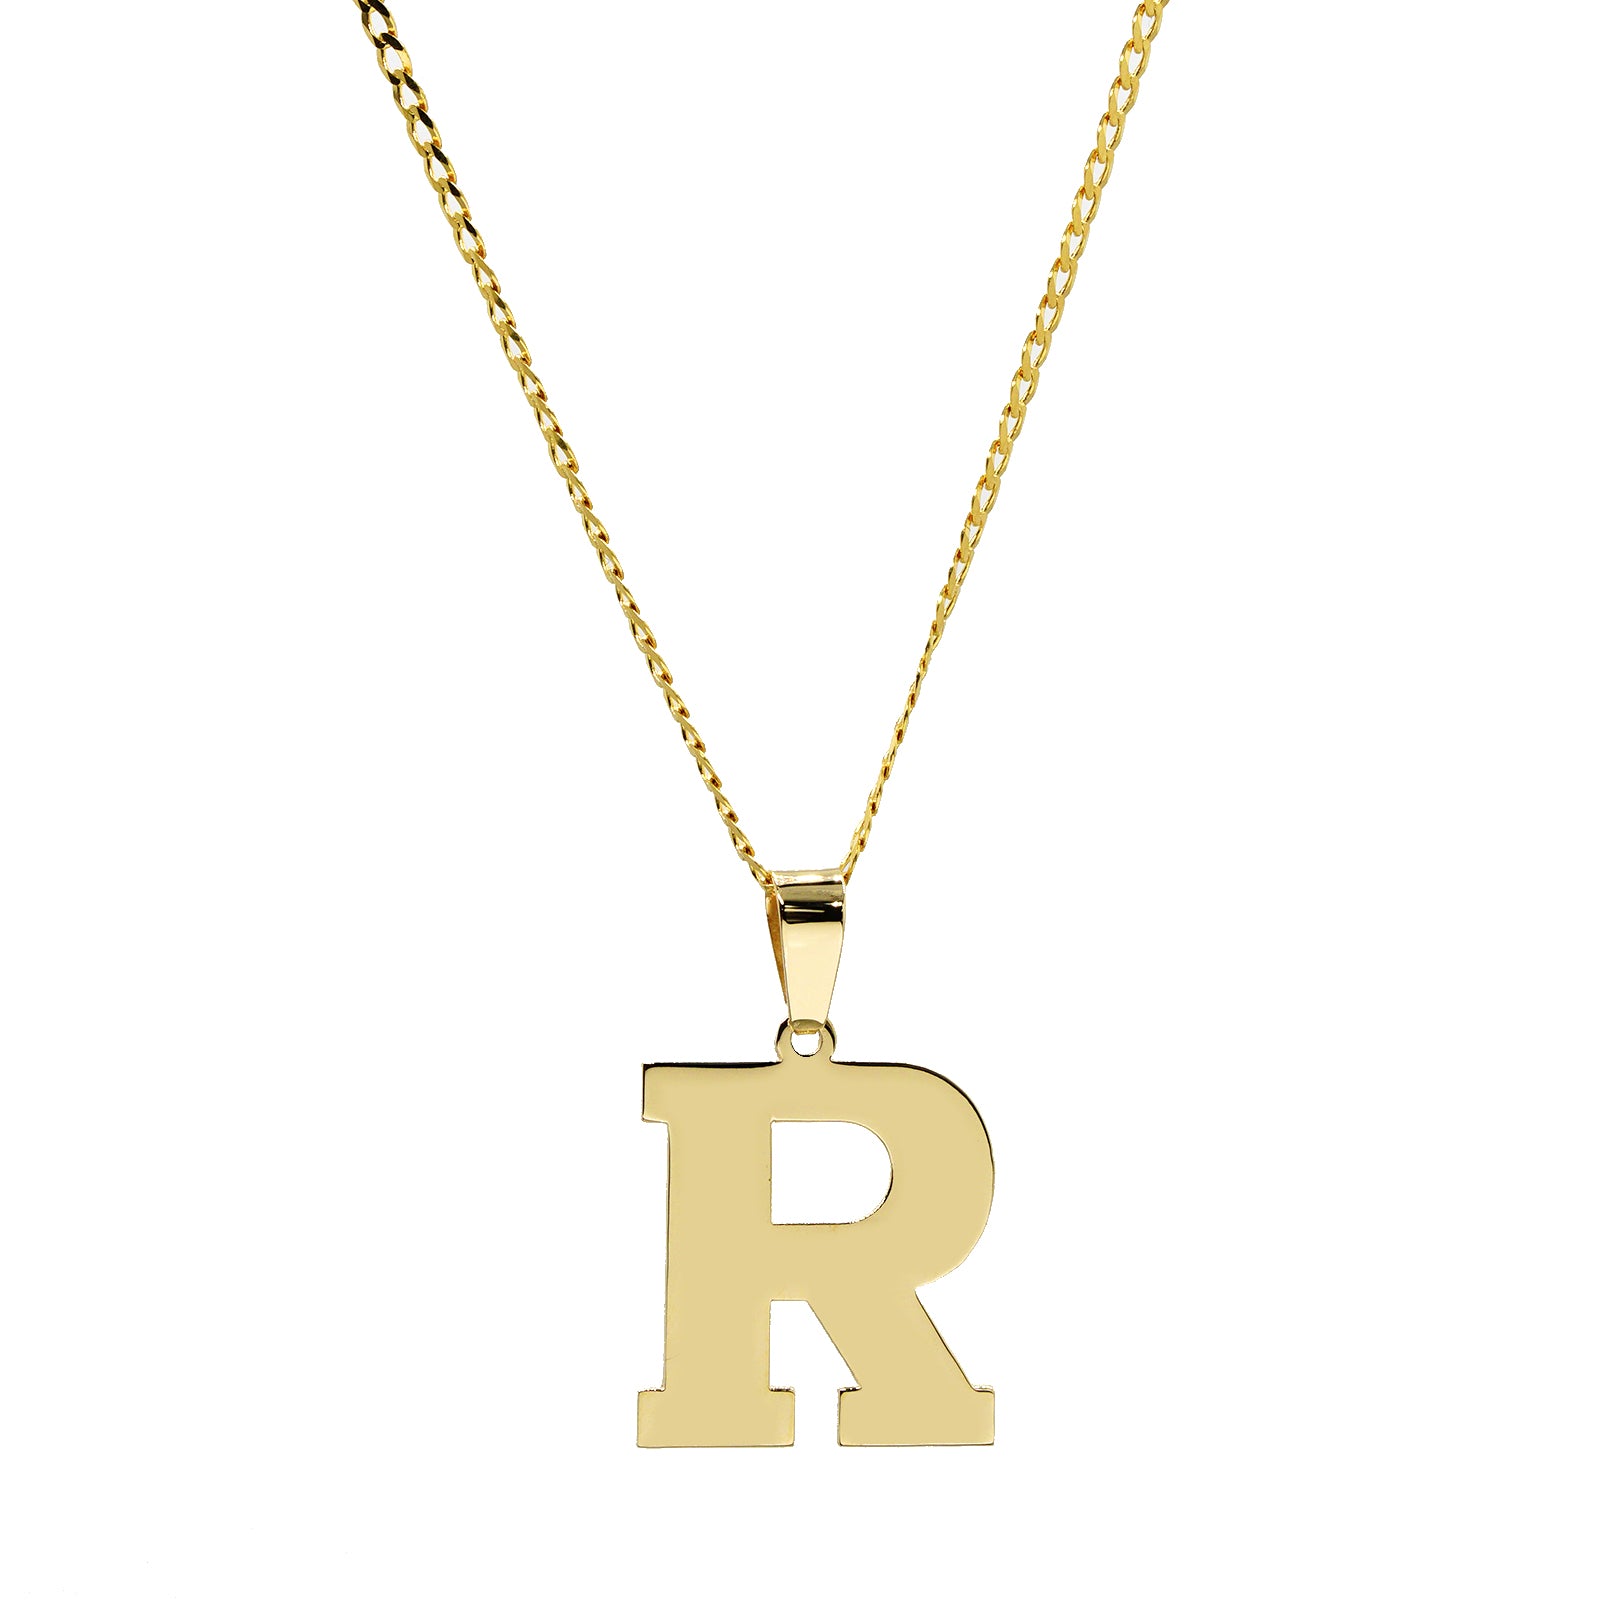 Solid Gold Swirly Initial Name Necklace